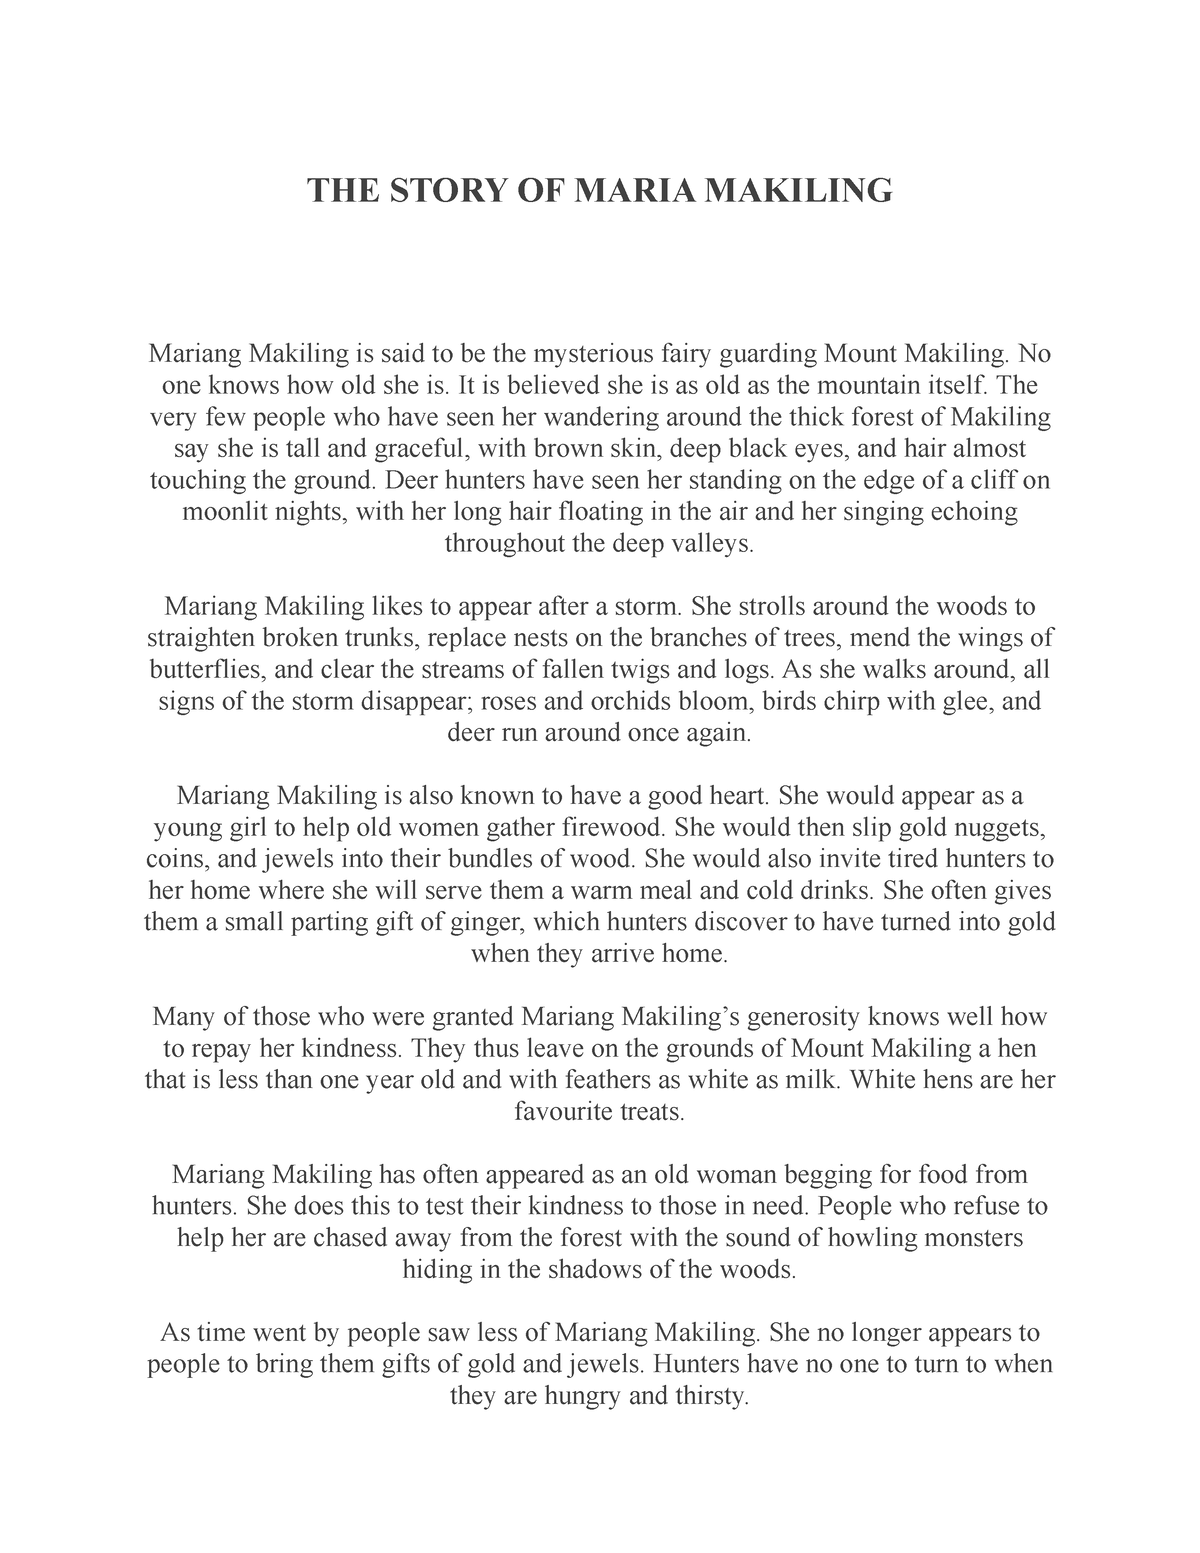 The Story Of Maria Makiling The Story Of Maria Makiling Mariang